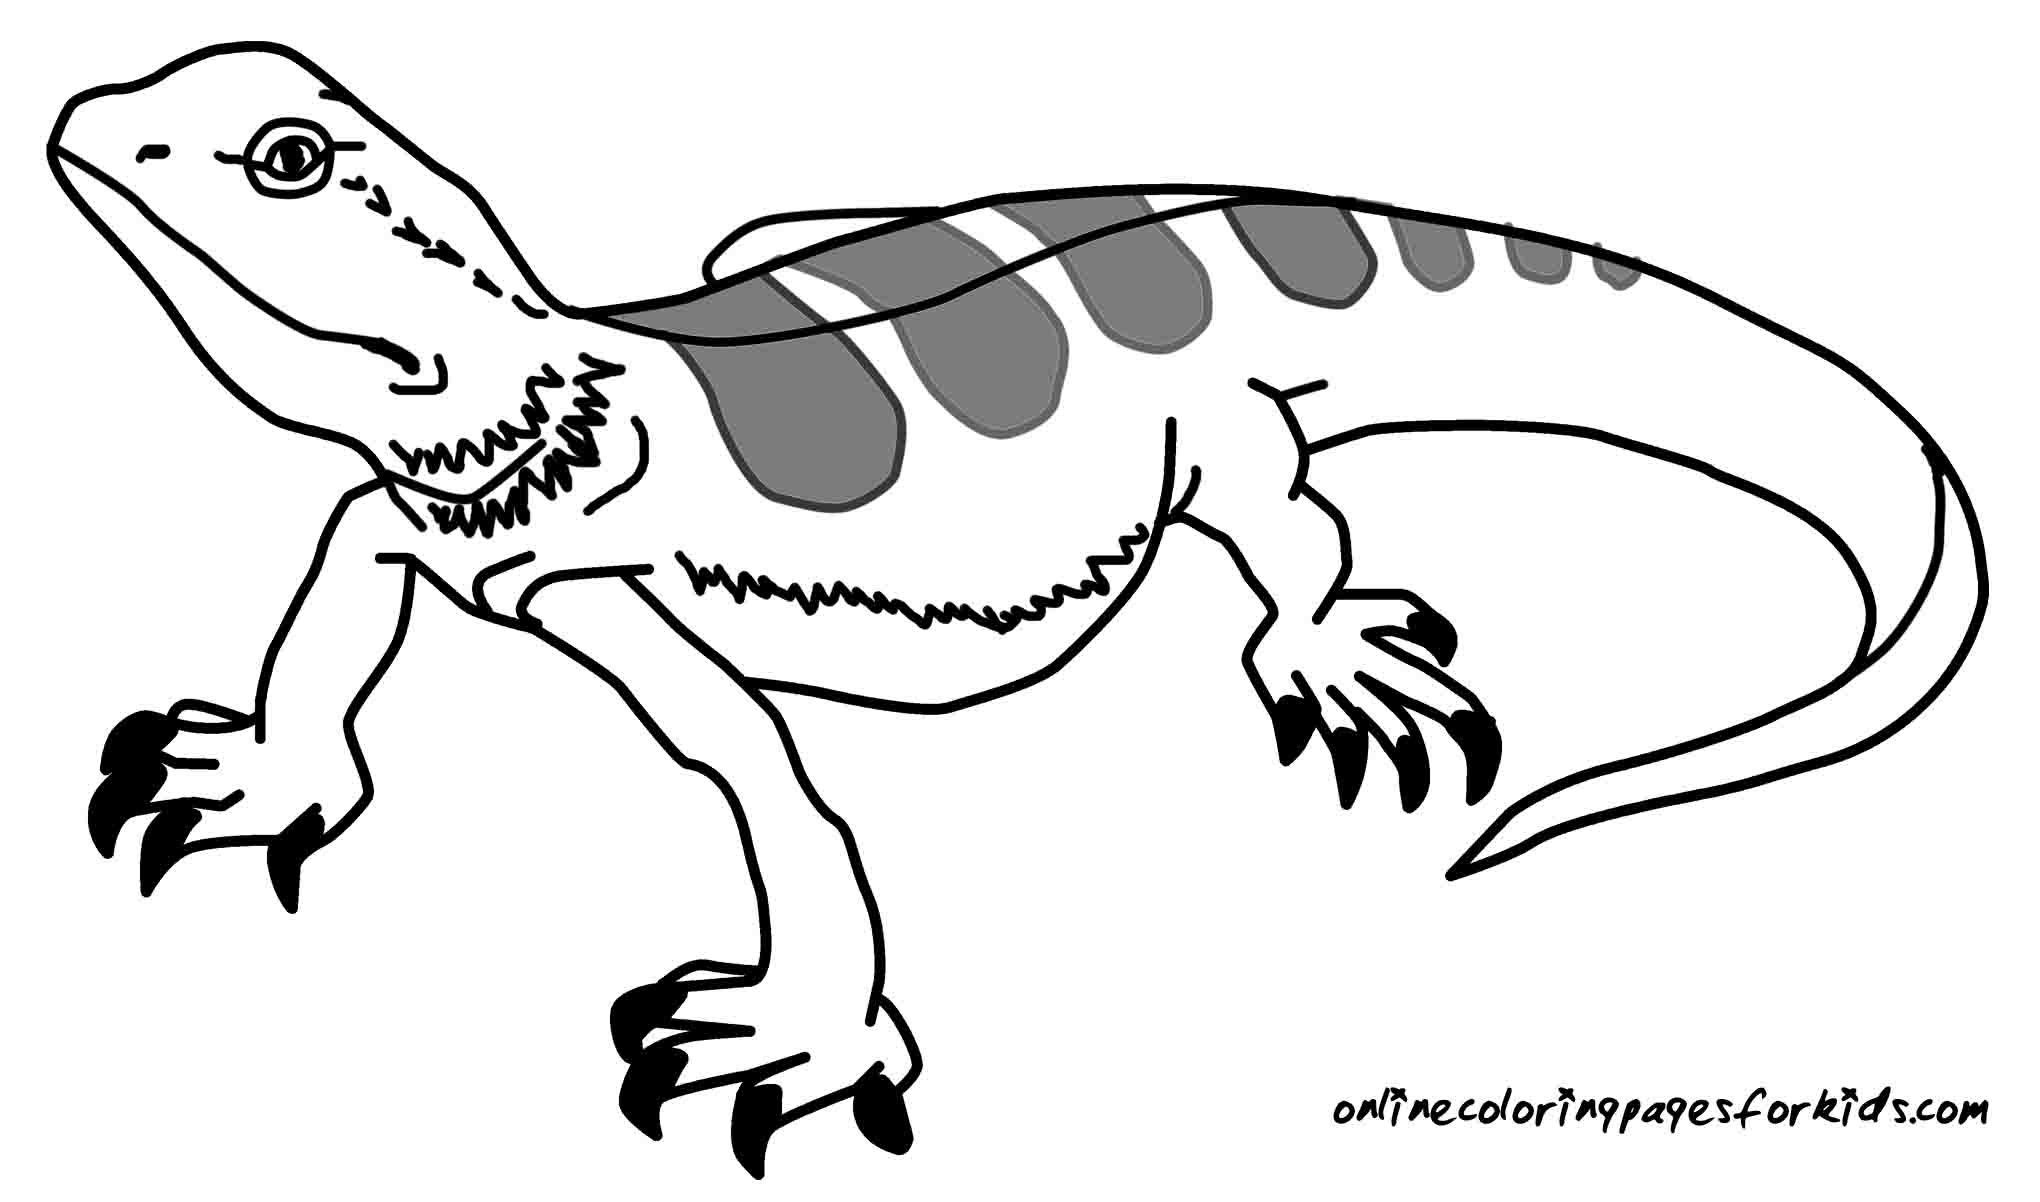 Reptile coloring pages to download and print for free